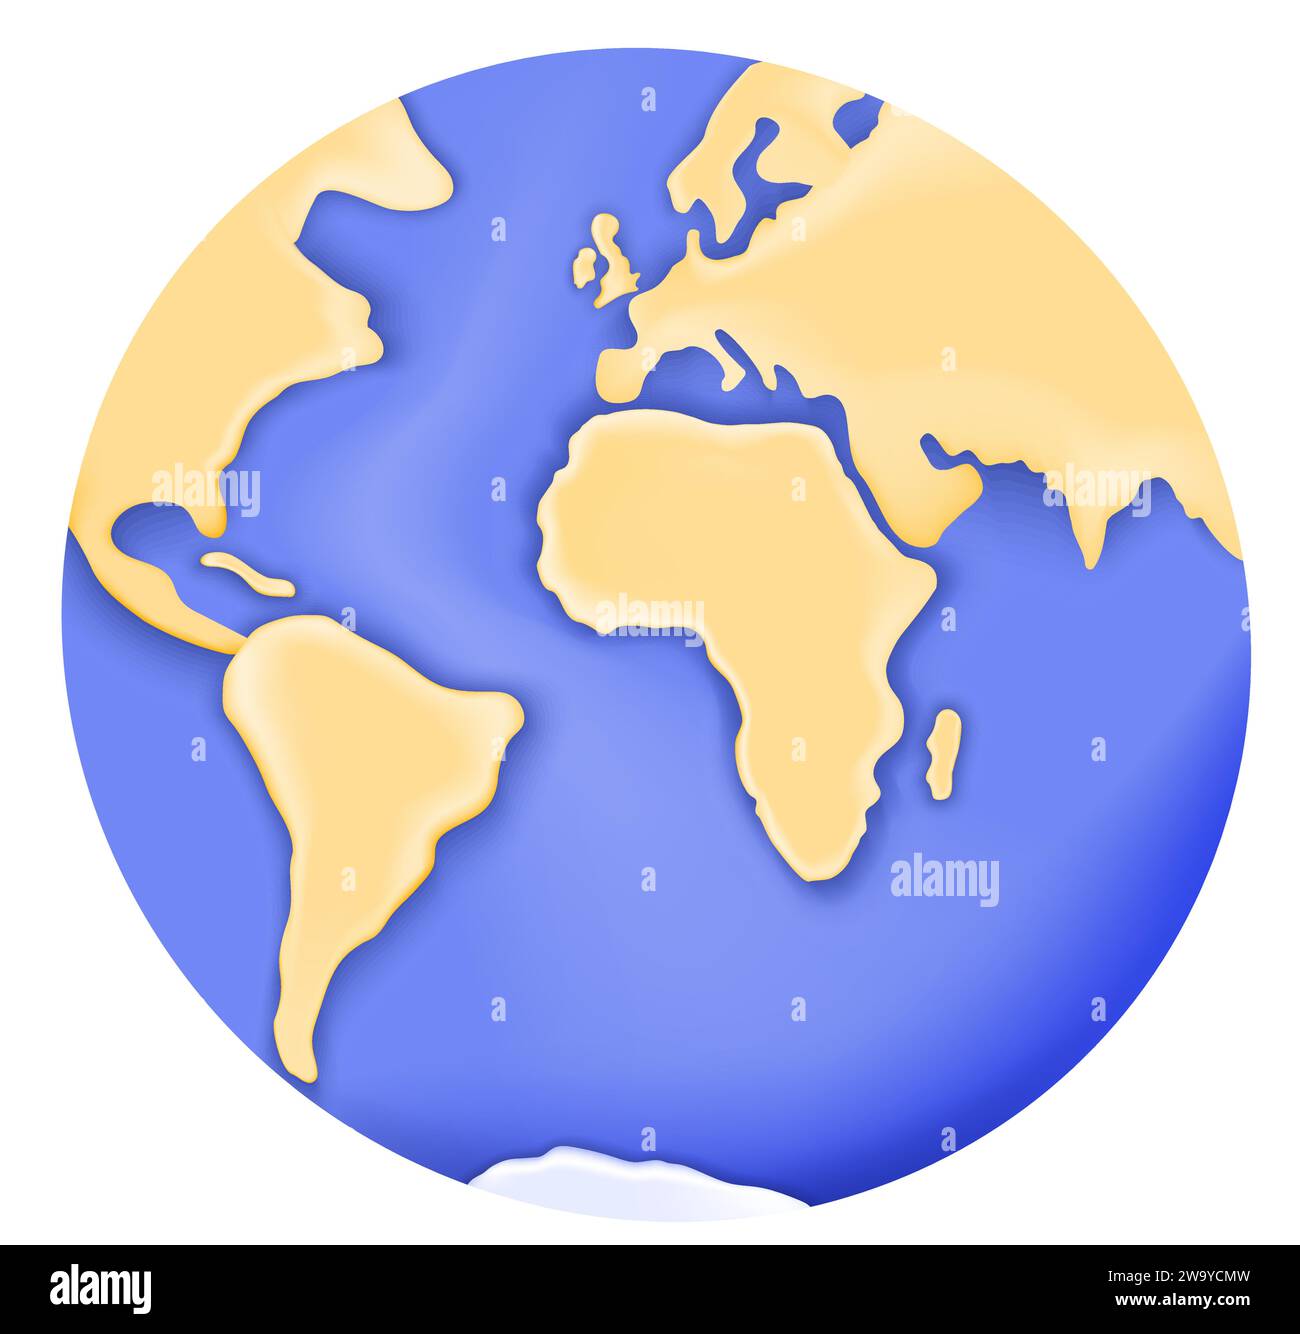 Cartoon planet Earth like a plasticine or plastic model. Yellow gold continents on a blue ocean background. 3d vector icon on white background. Stock Vector